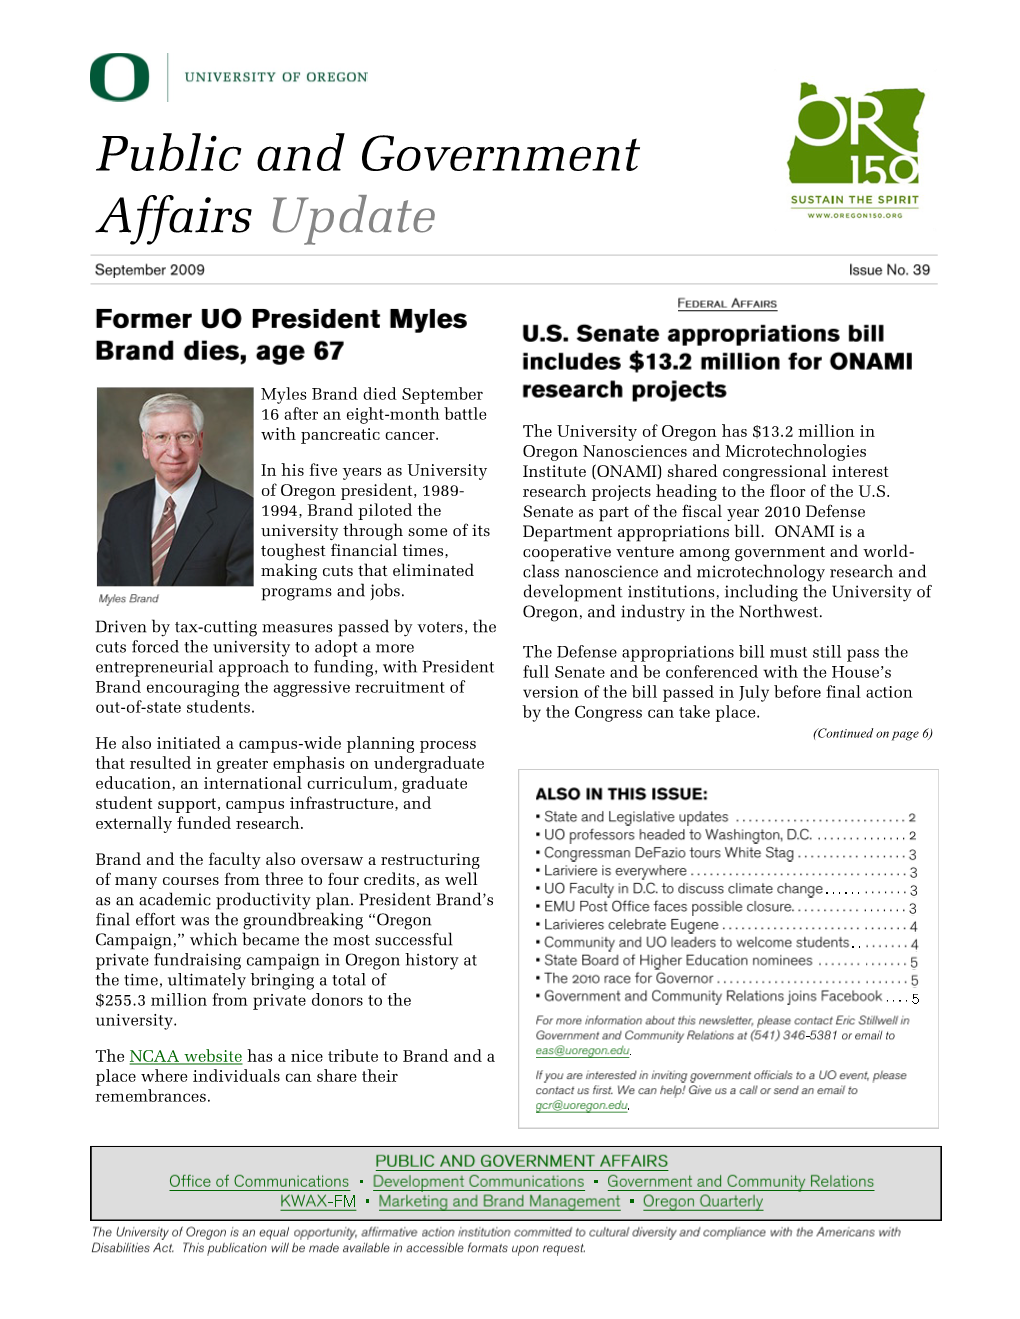 Public and Government Affairs Update